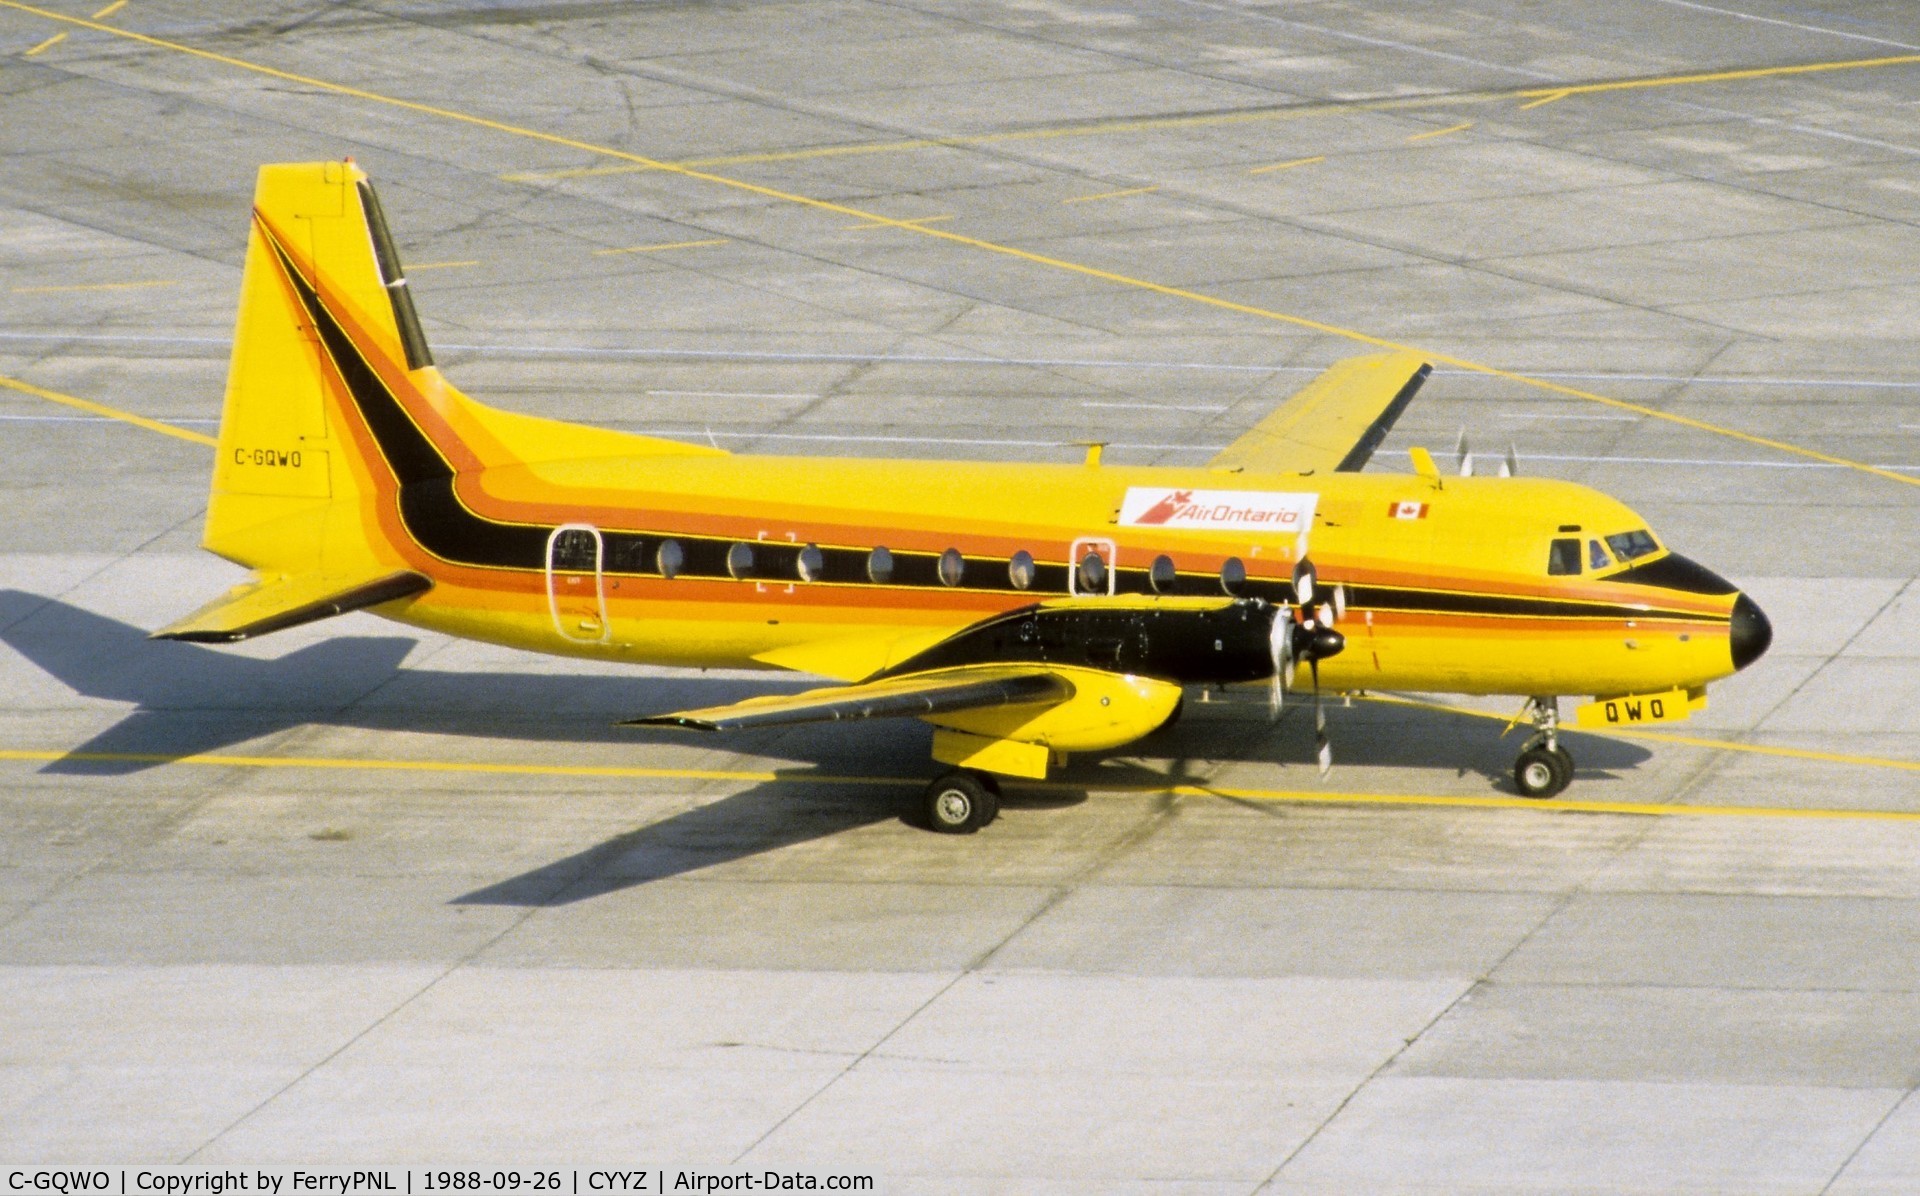 C-GQWO, 1966 Hawker Siddeley HS.748 Series 2A C/N 1597, Air Ontario using a very colorful HS748